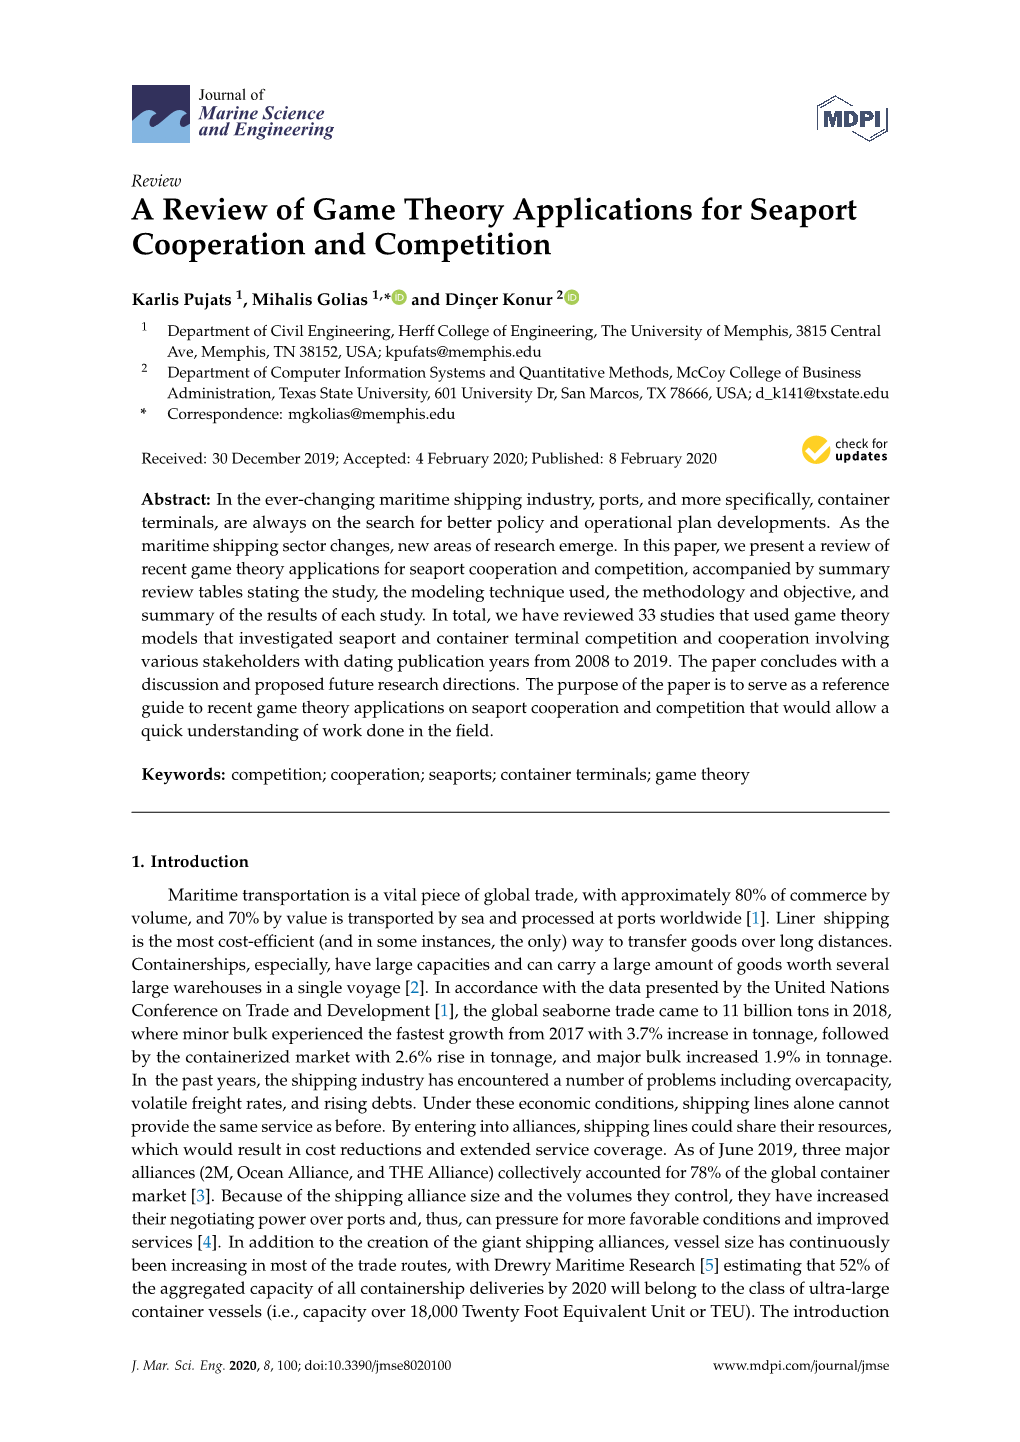 A Review of Game Theory Applications for Seaport Cooperation and Competition